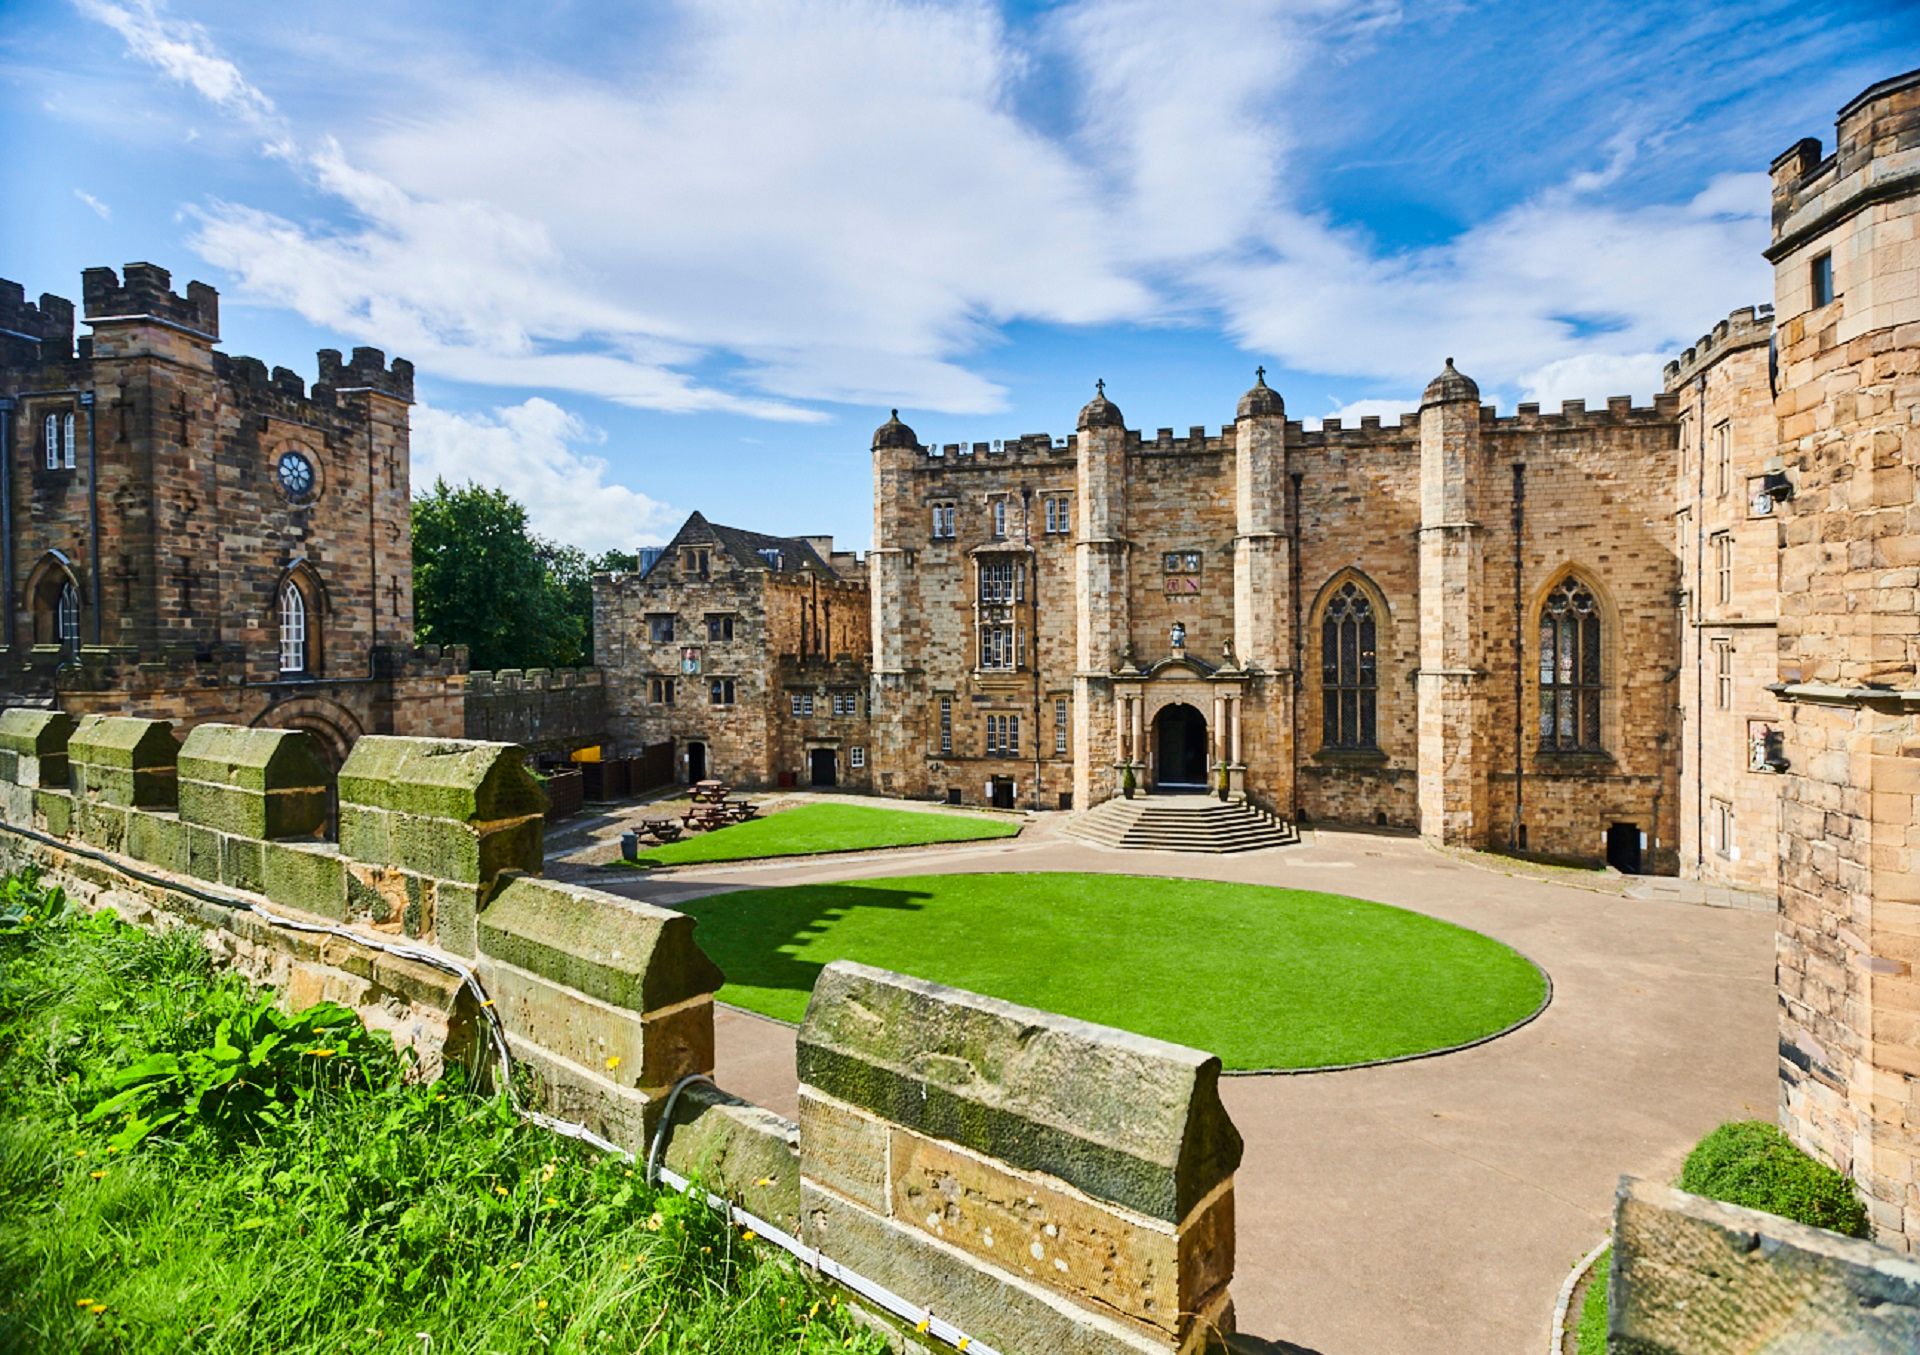 Photograph of Durham Castle taken from the Keep looking towards the Great Hall and the Gatehouse.